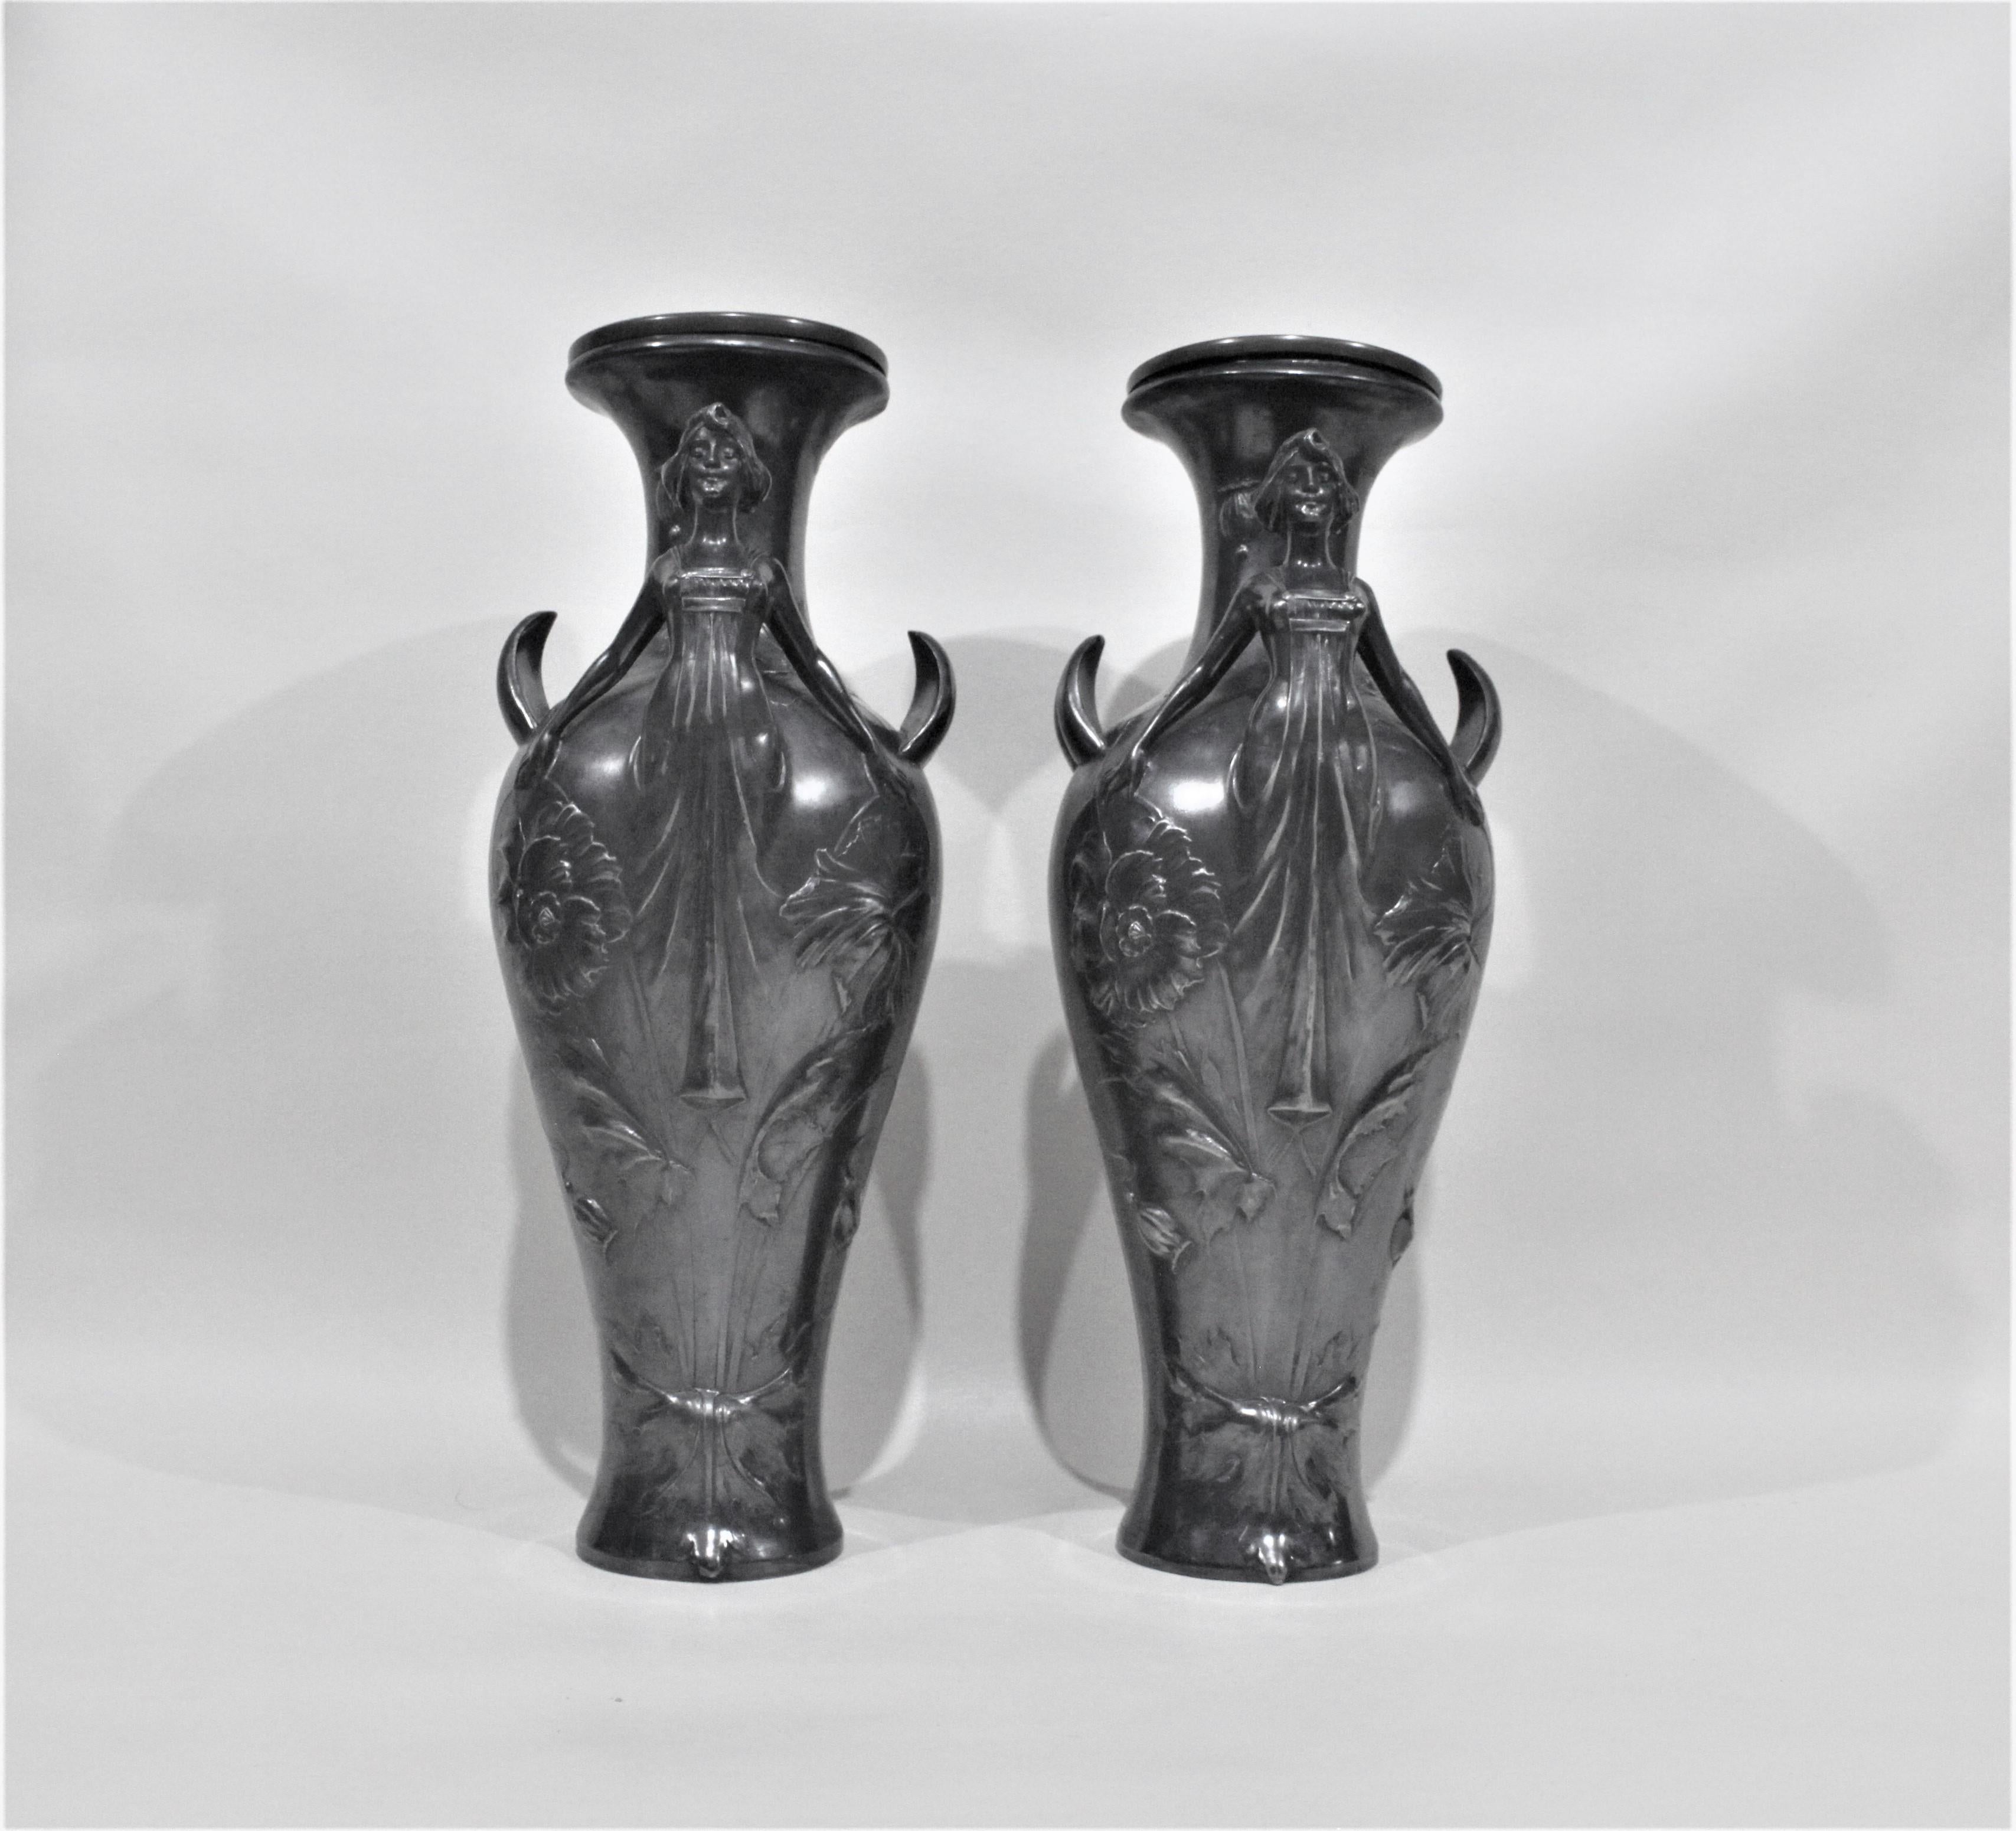 Pair of Art Nouveau Silver Plated Vases with Stylized Female Figures In Good Condition For Sale In Hamilton, Ontario